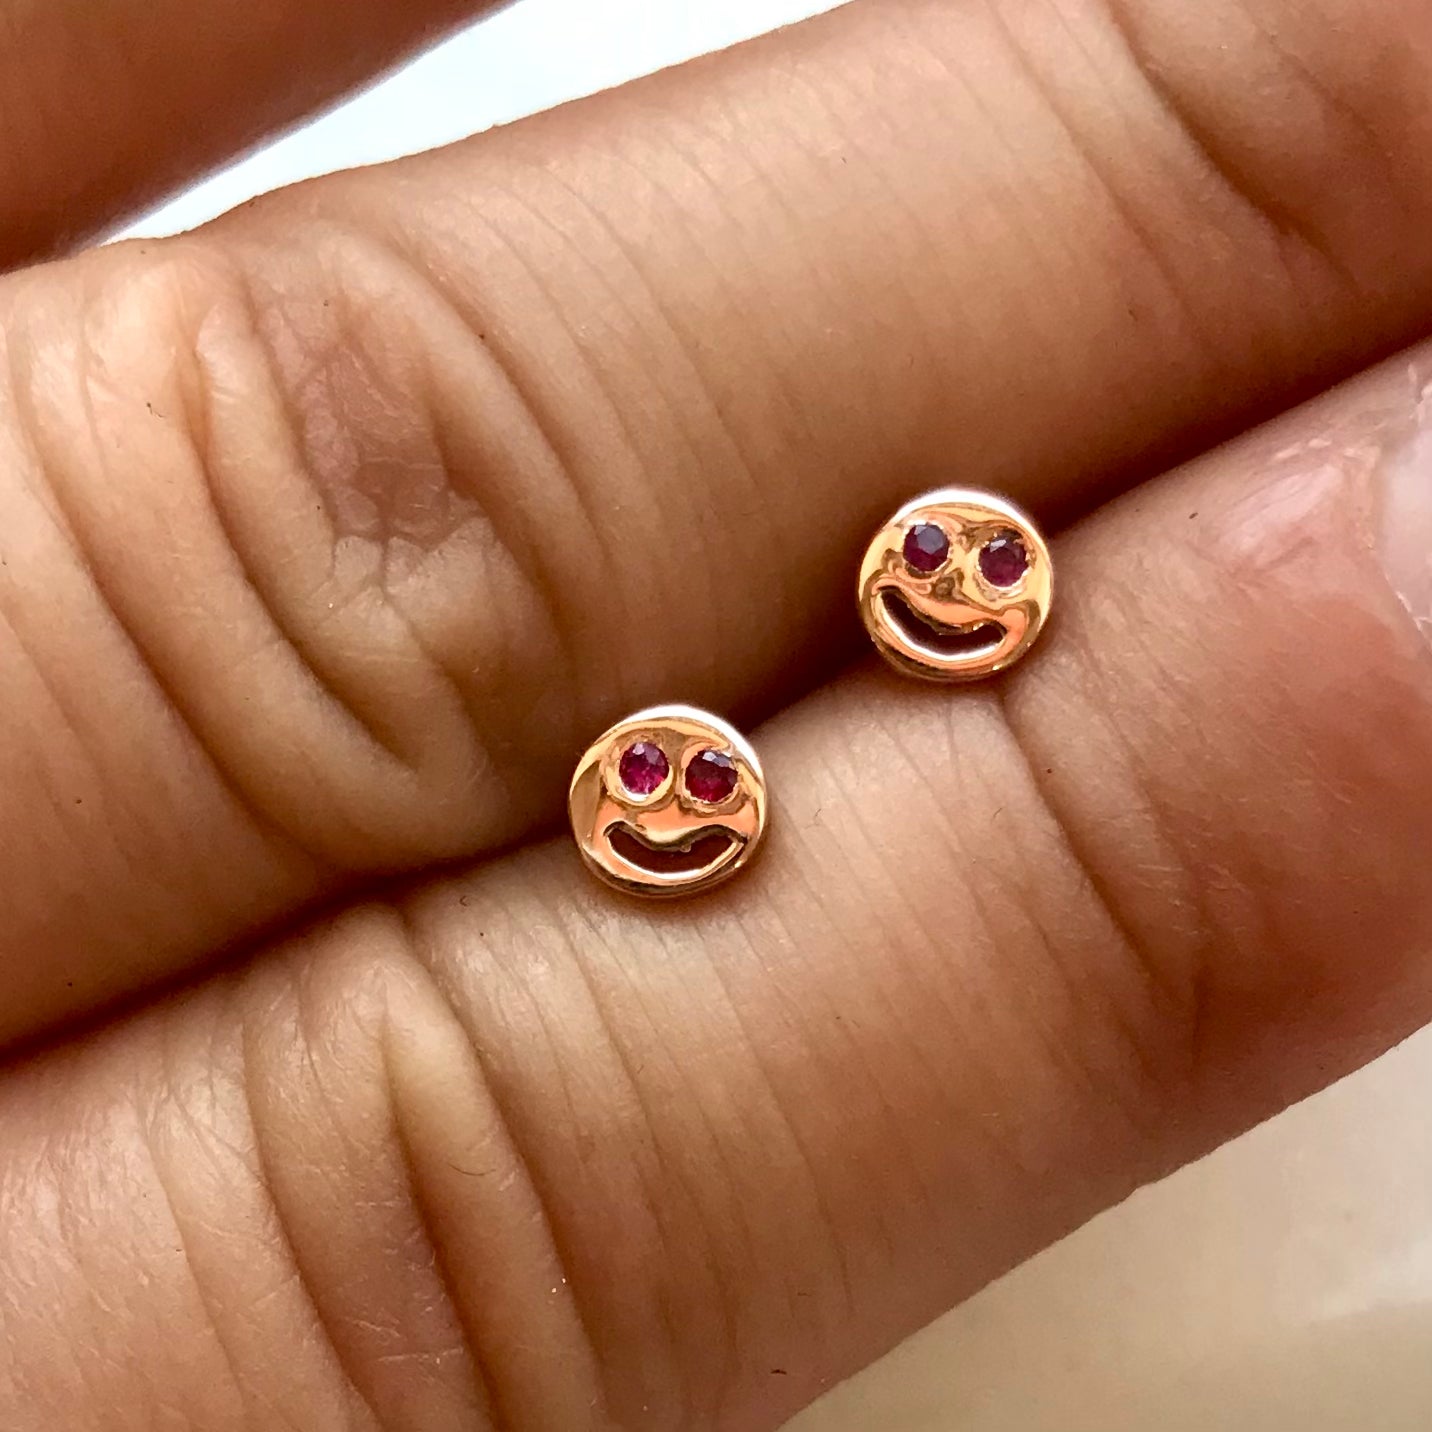 Smiley Face Studs with Ruby Accents - Bing Bang Jewelry NYC